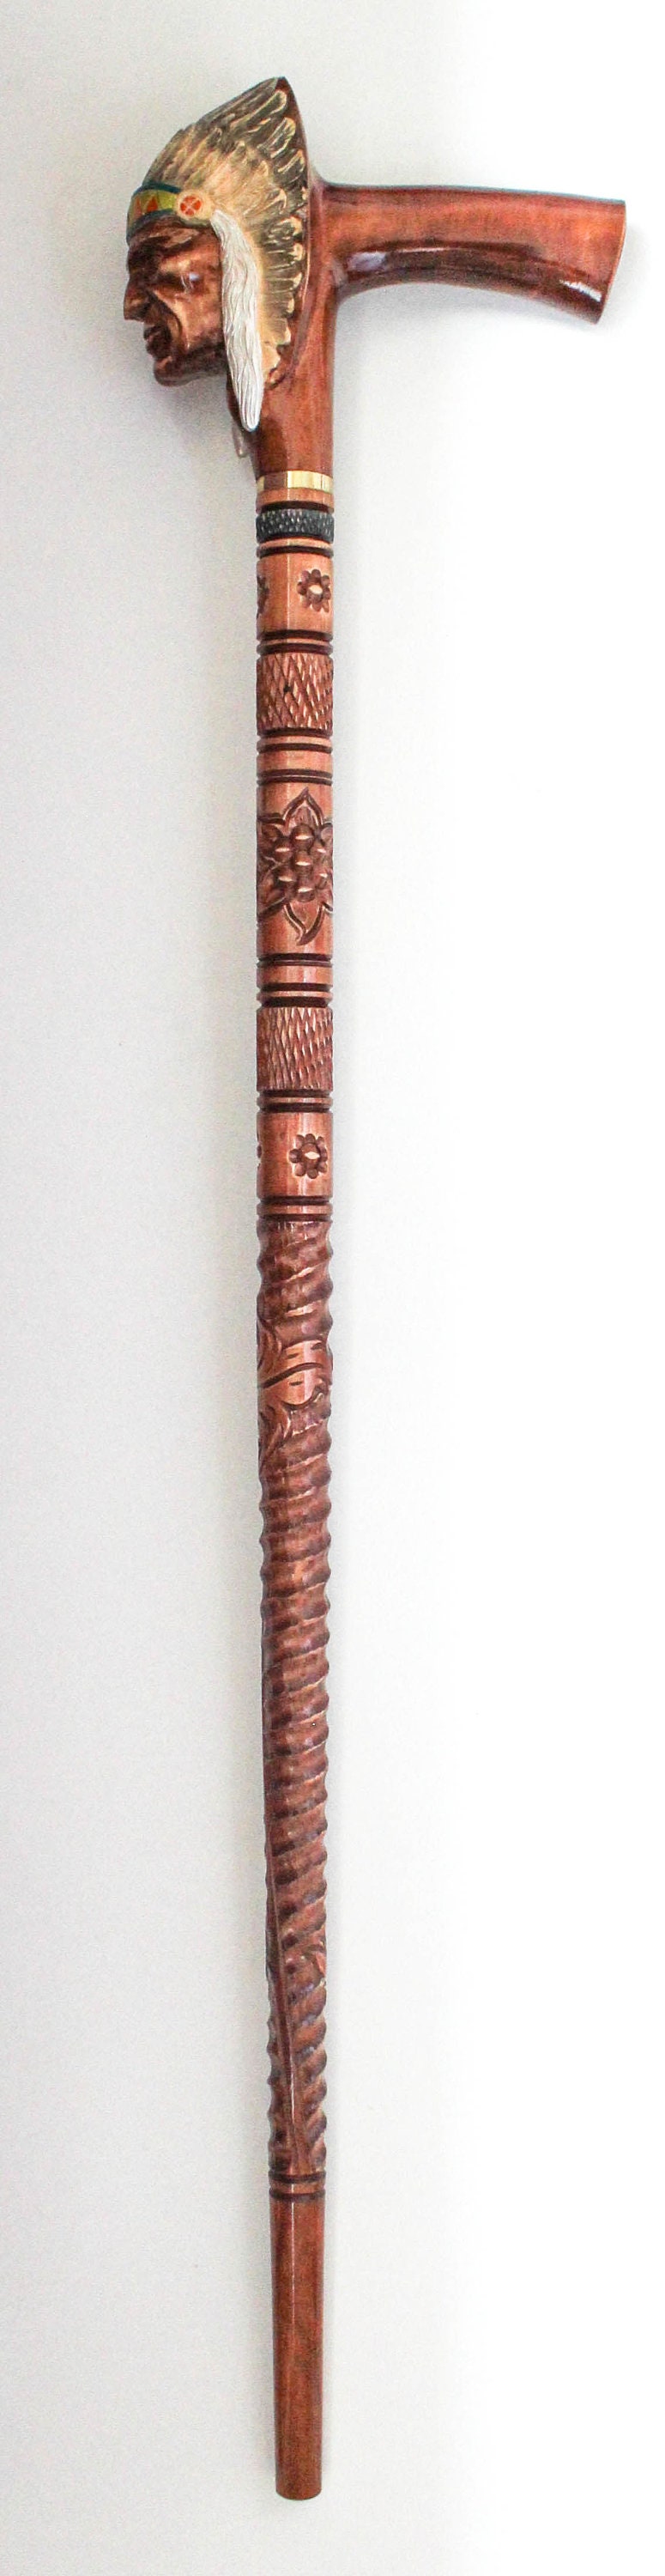 Wooden Walking cane Indian Chief stick Hand Carved Wood Crafted for men  women